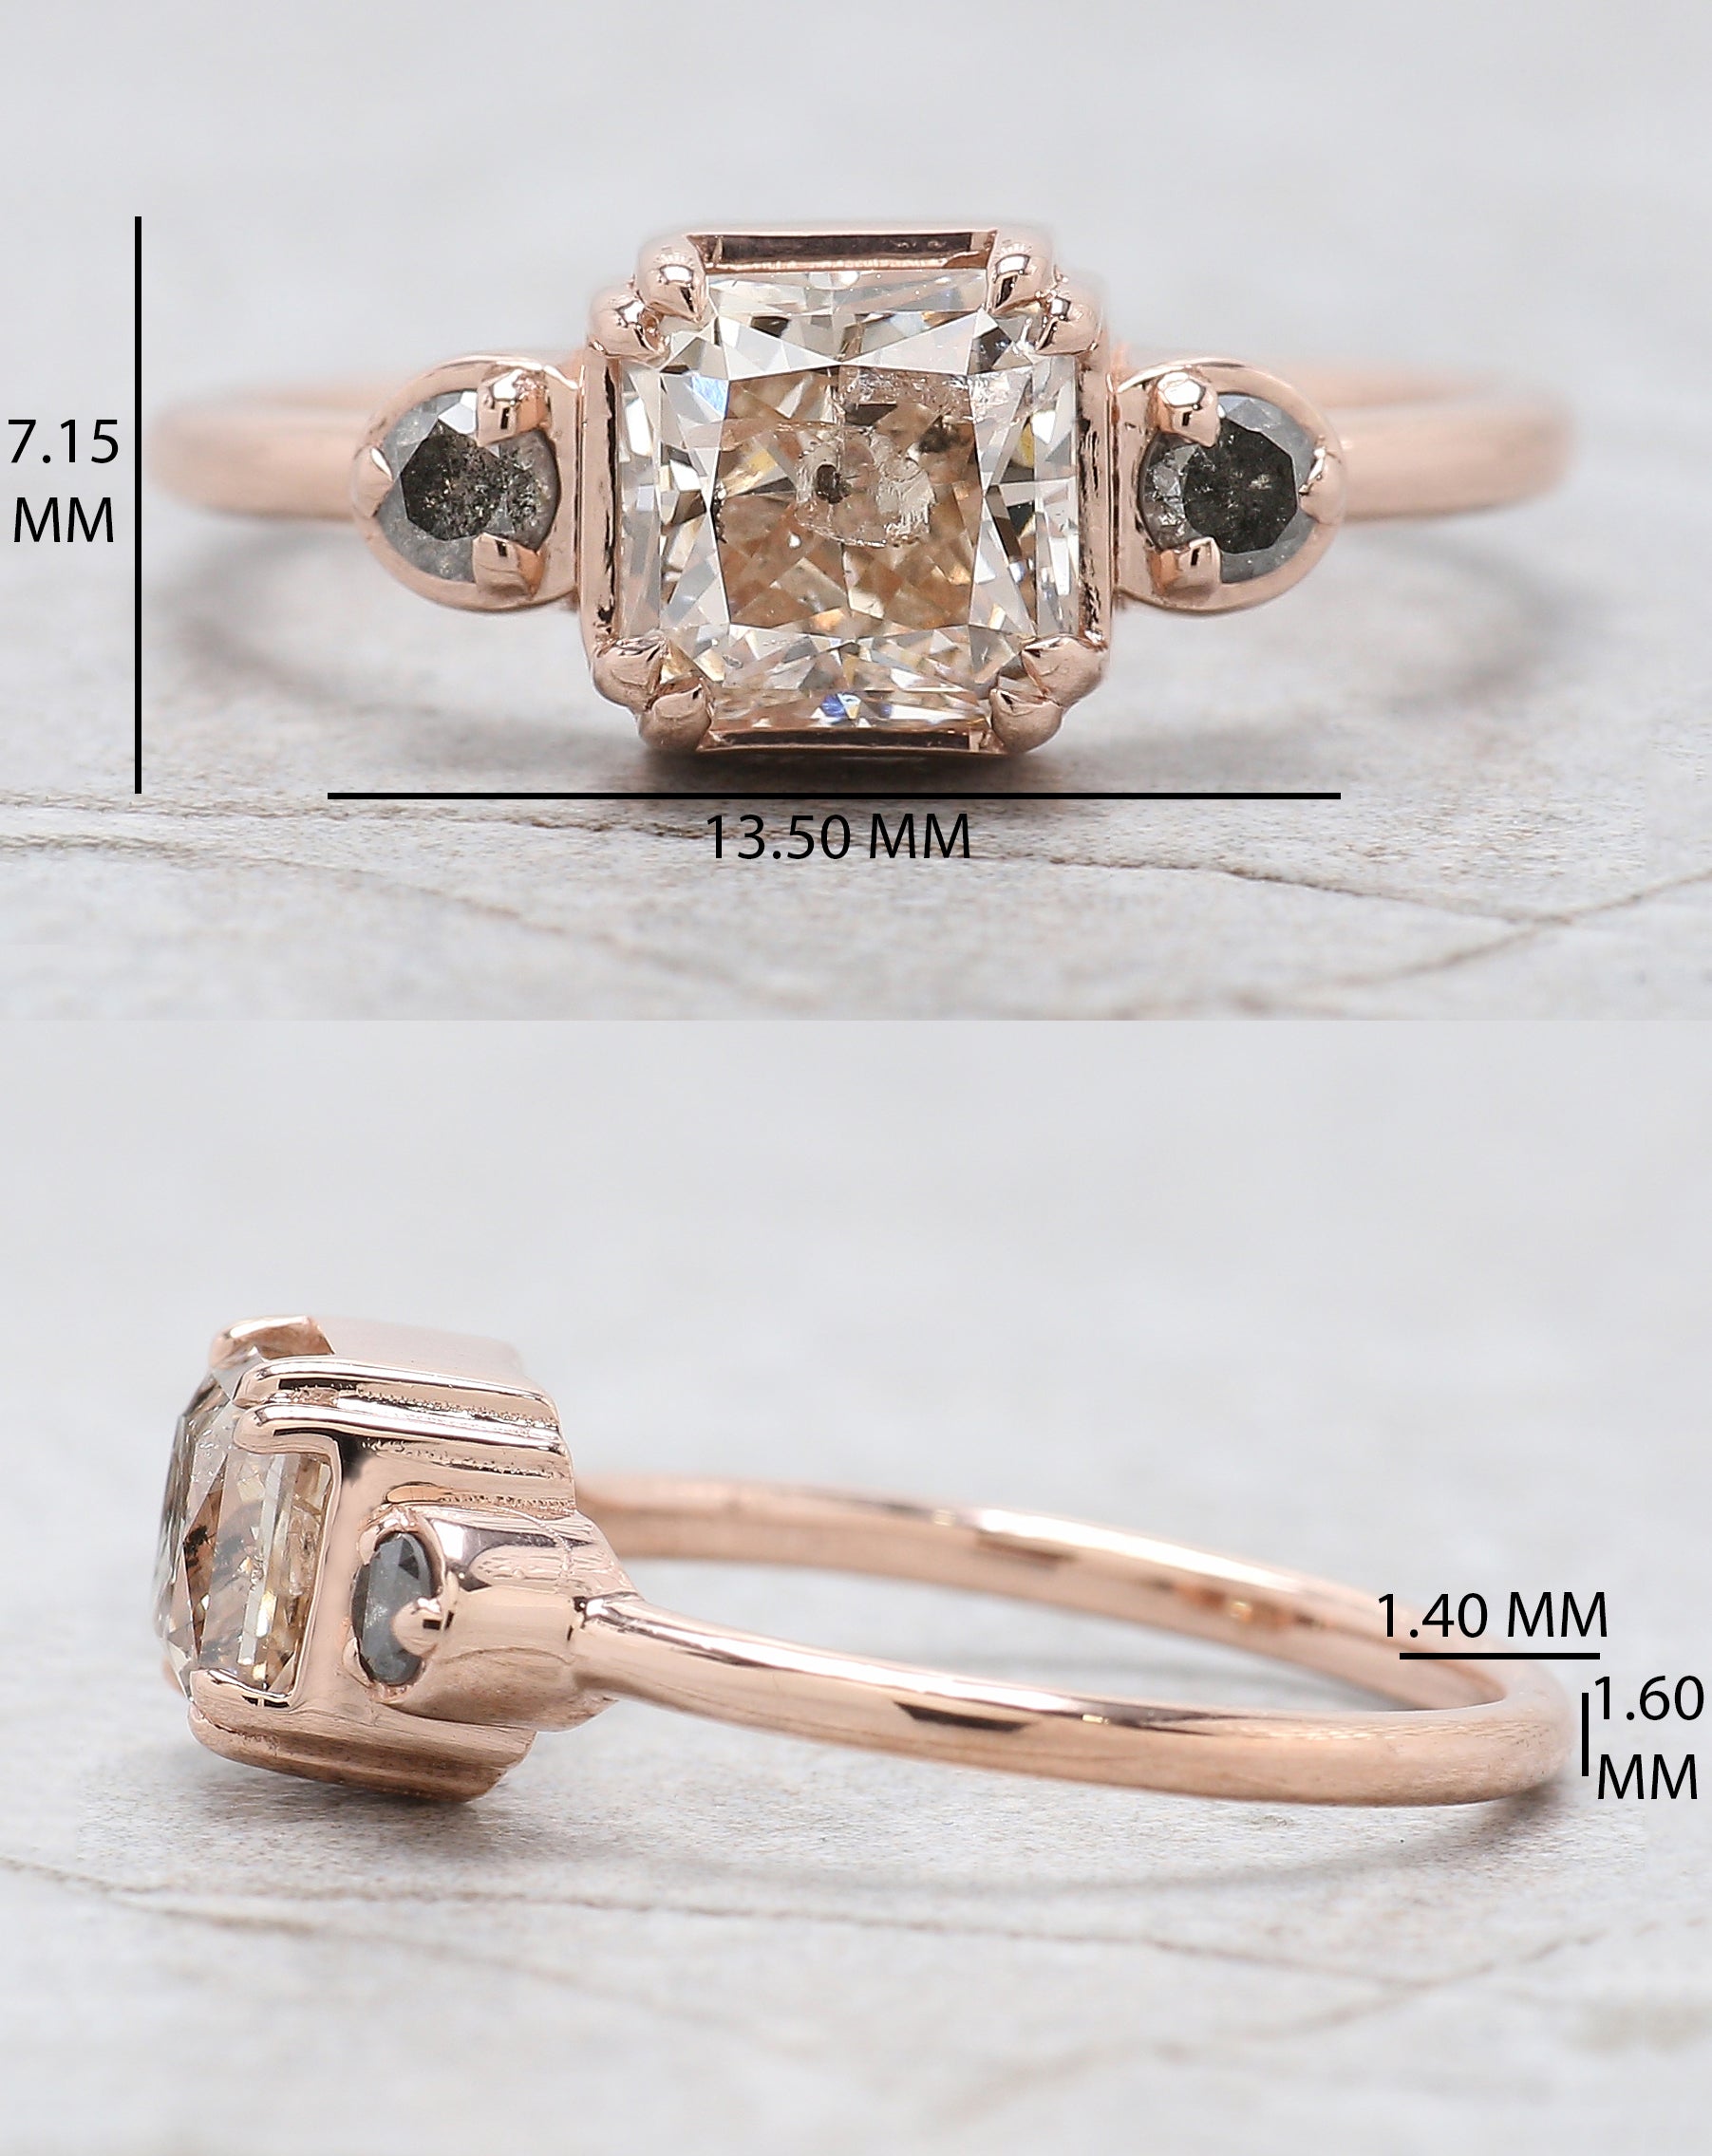 Radiant Salt And Pepper Diamond Ring 1.43 Ct 5.97 MM Radiant Diamond Ring 14K Solid Rose Gold Silver Engagement Ring Gift For Her QL2662